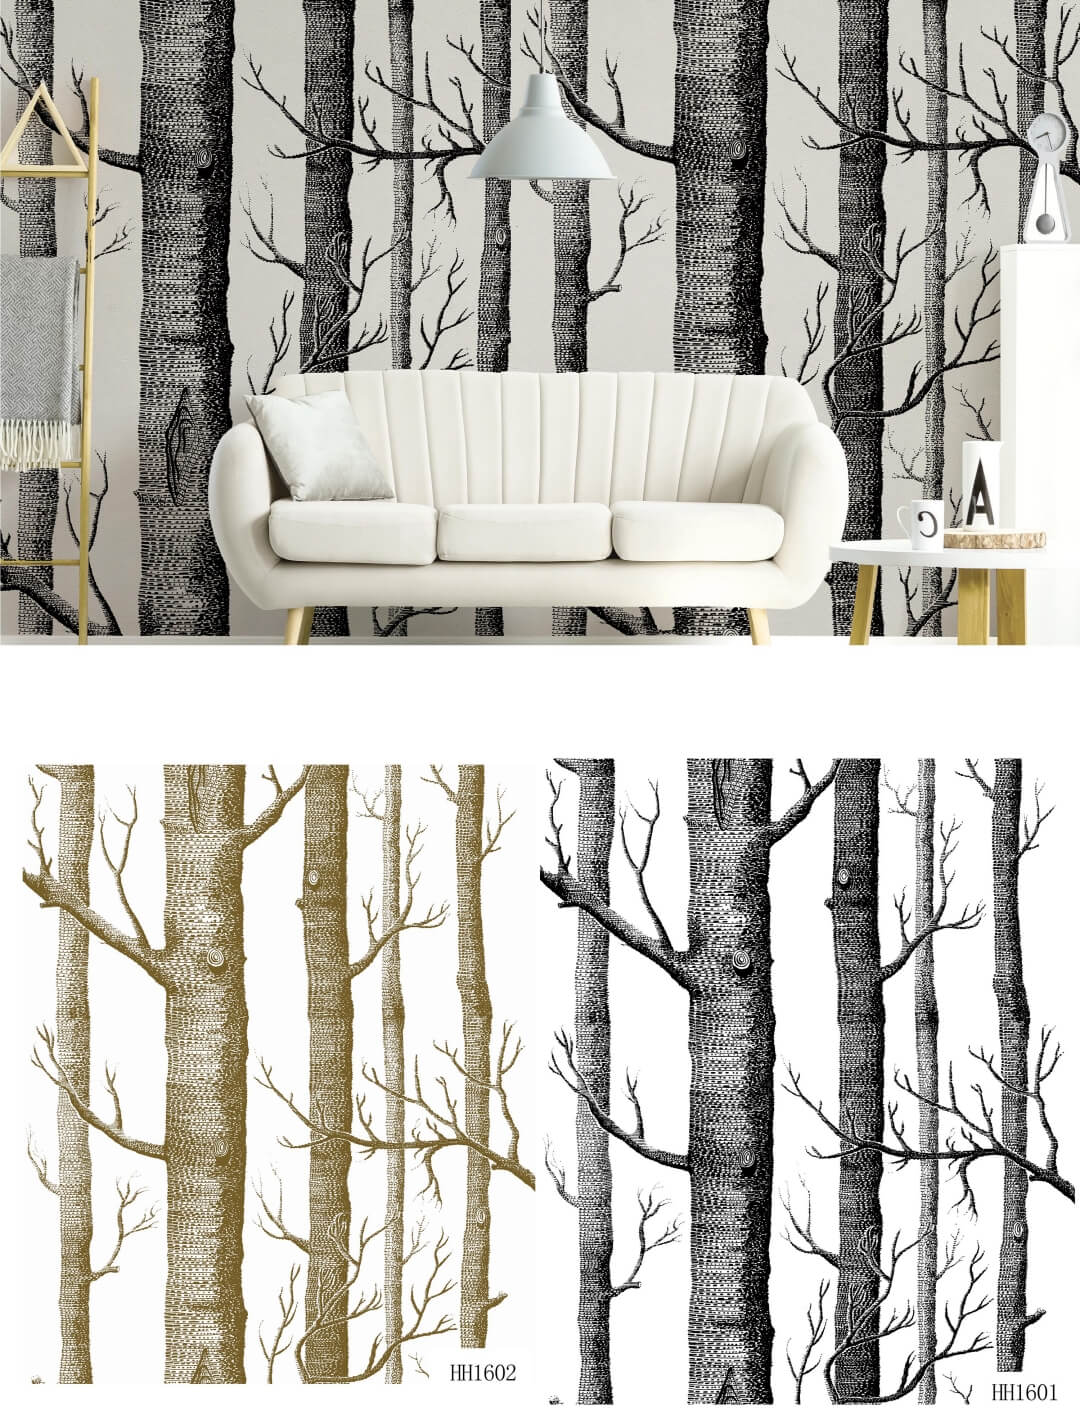 New Wallpaper Collection From China Wallpaper Factory (5)